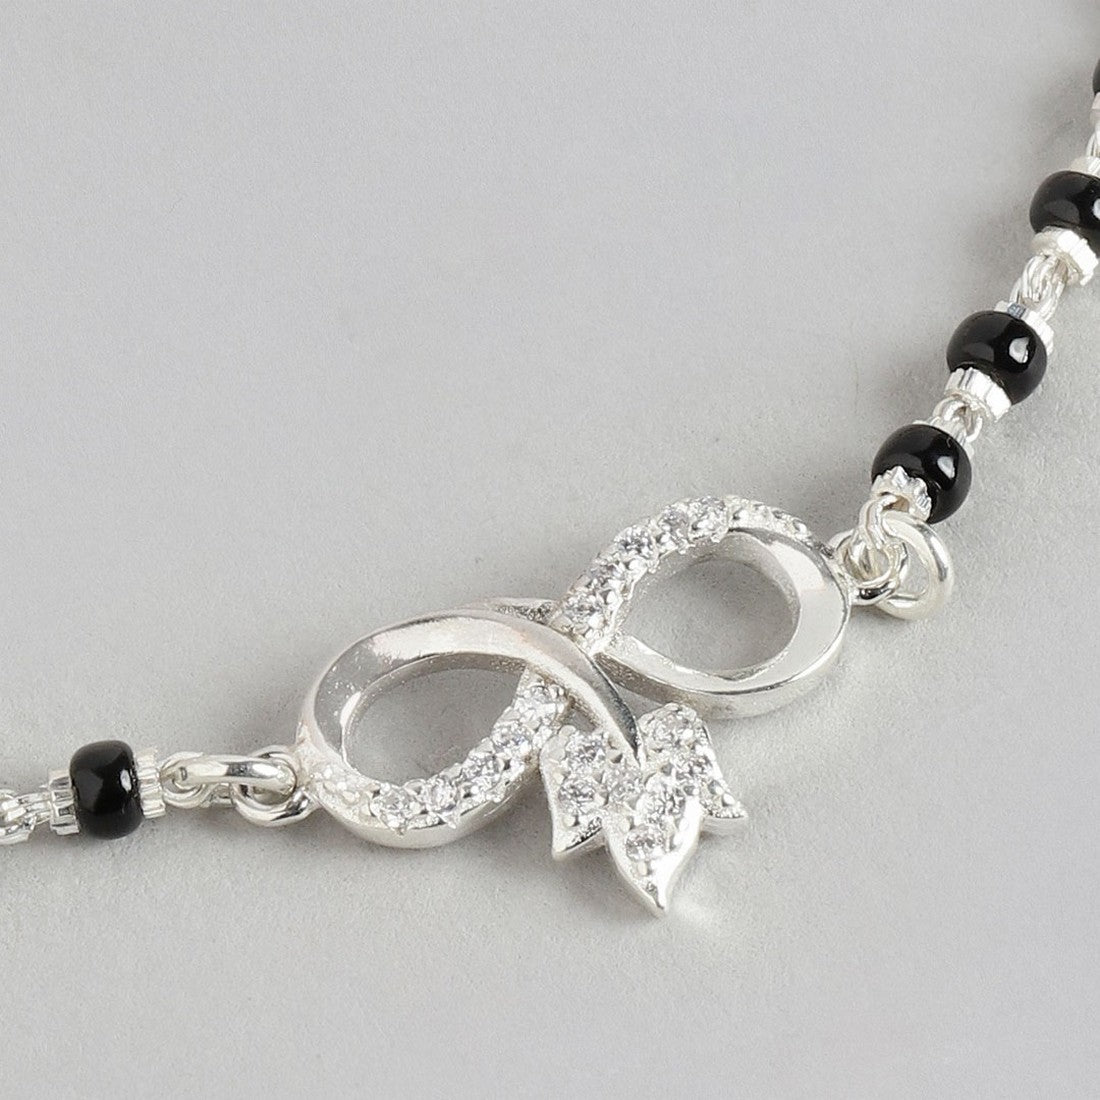 Twisted Infinity 925 Silver Mangalsutra Bracelet